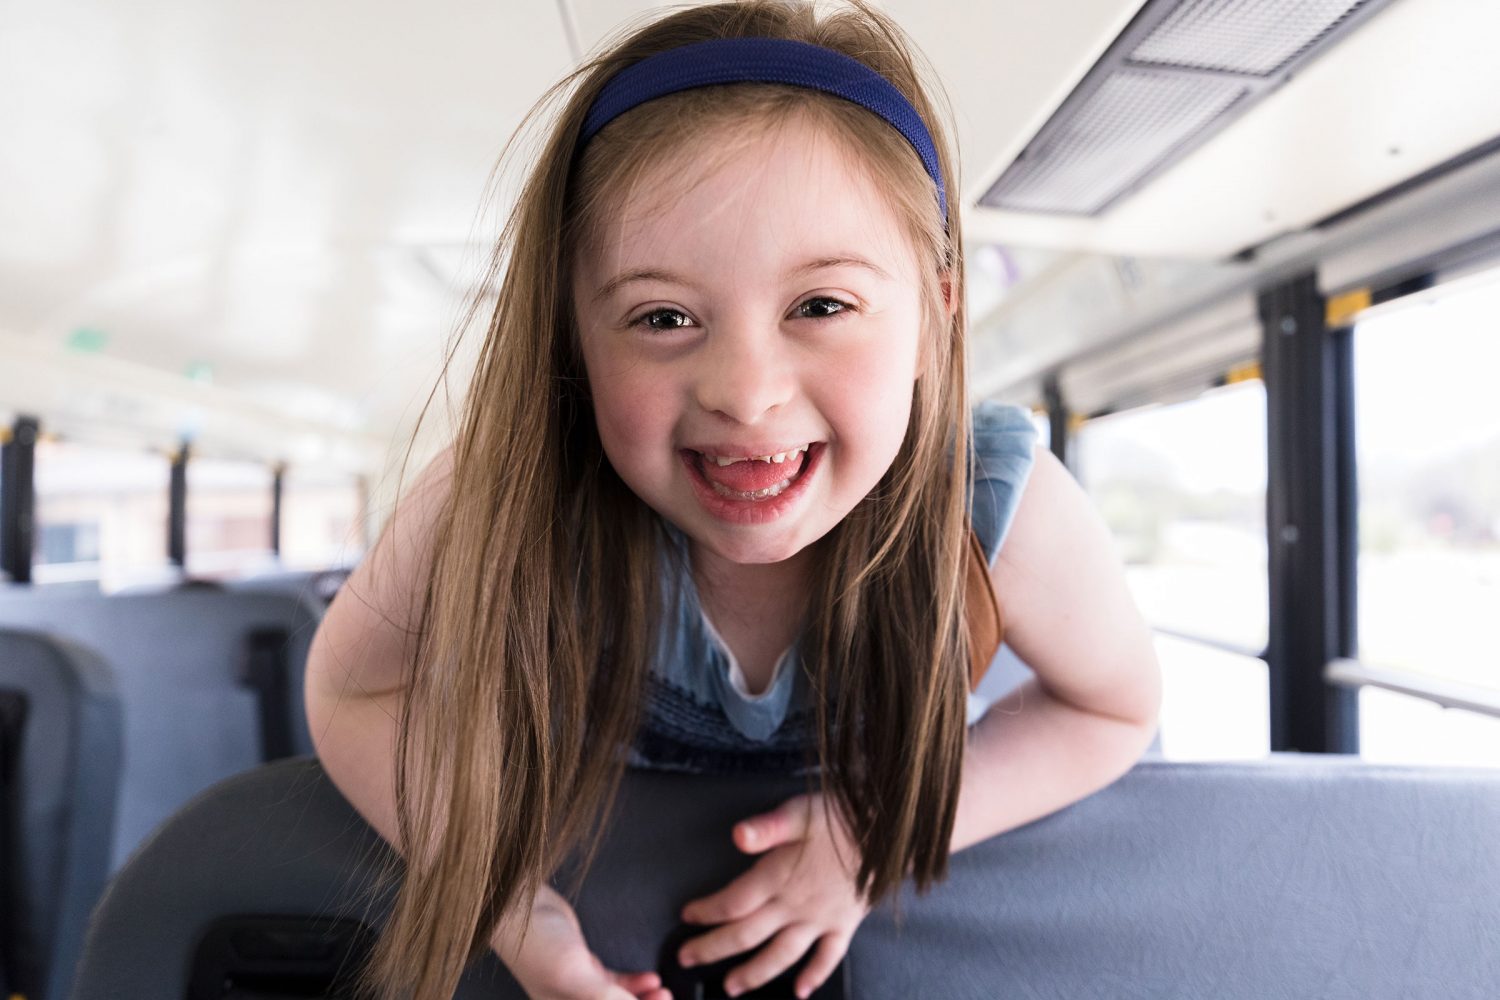 Girl with Down syndrome smiles on school bus